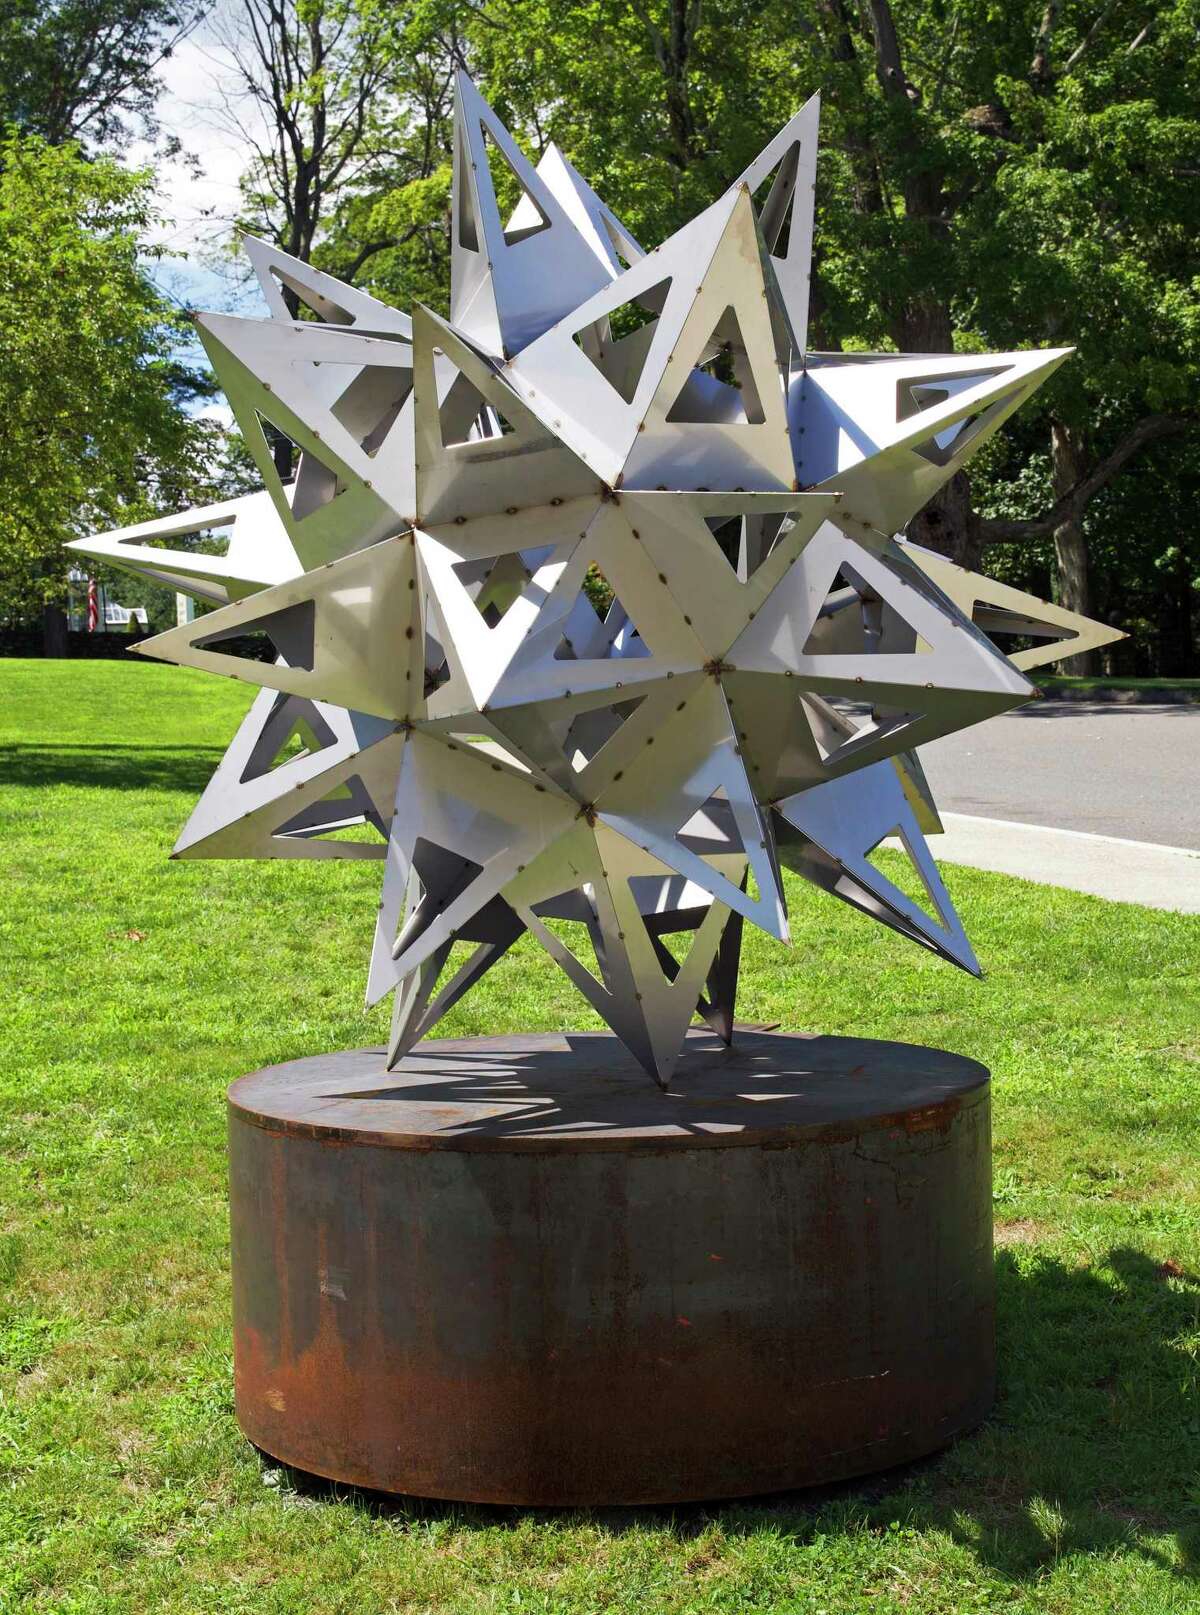 The exhibit "Frank Stella’s Stars, A Survey" at the Aldrich Contemporary Art Museum showcases artwork such as "Jay’s Star."